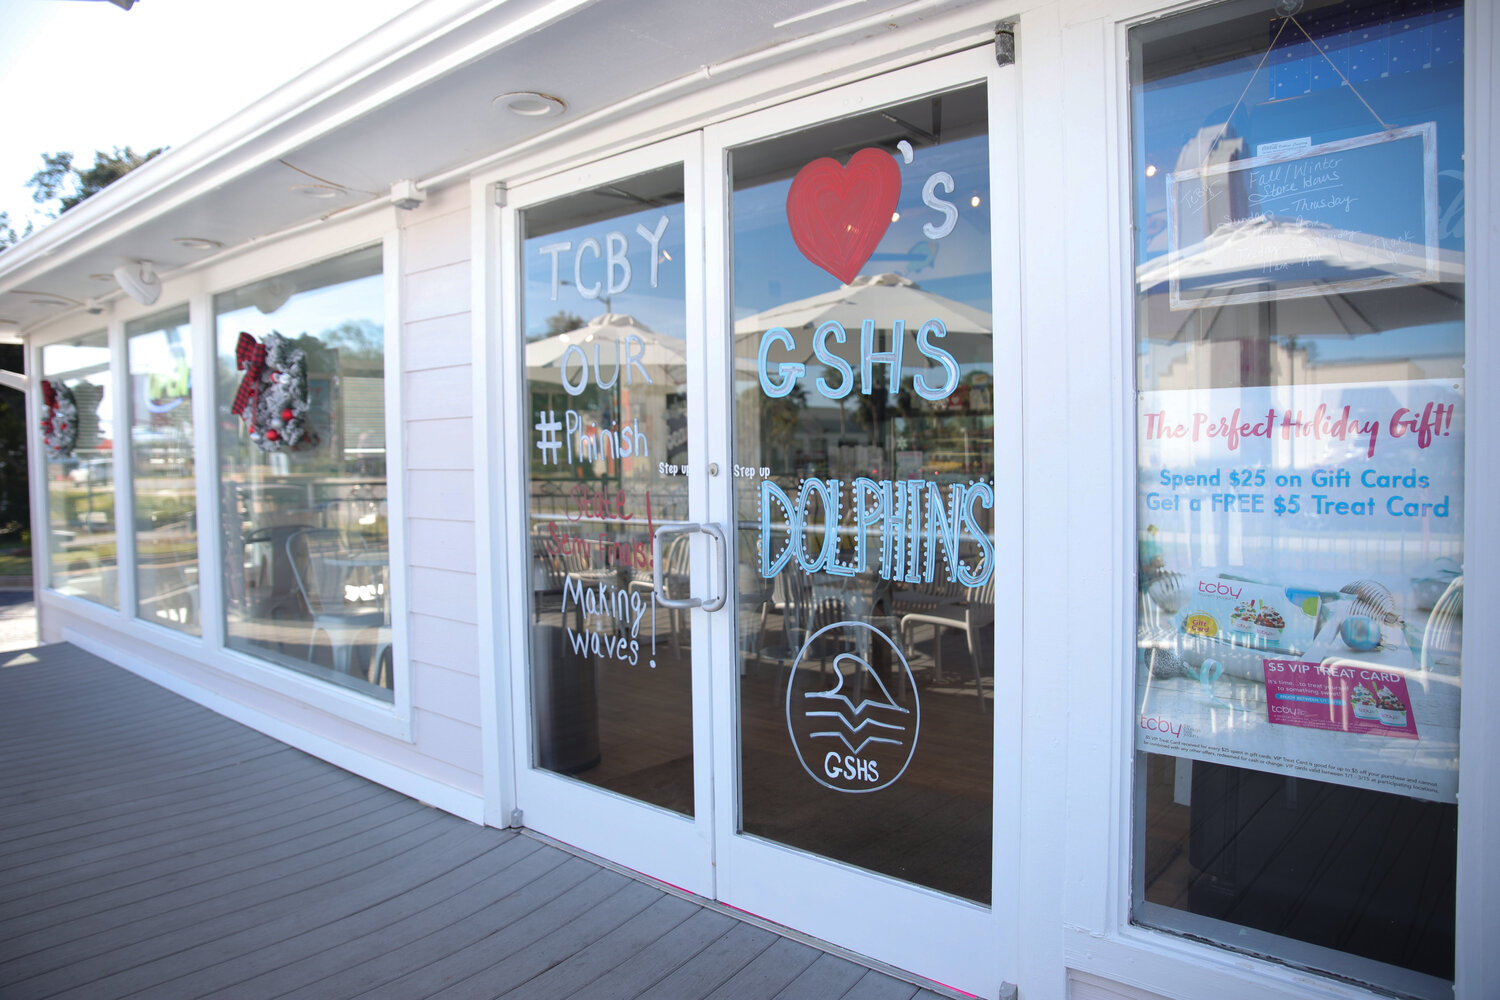 TCBY Gulf Shores shows their support to the GSHS football team and their accomplishments by painting "TCBY loves our GSHS Dolphins," on the front entrance.